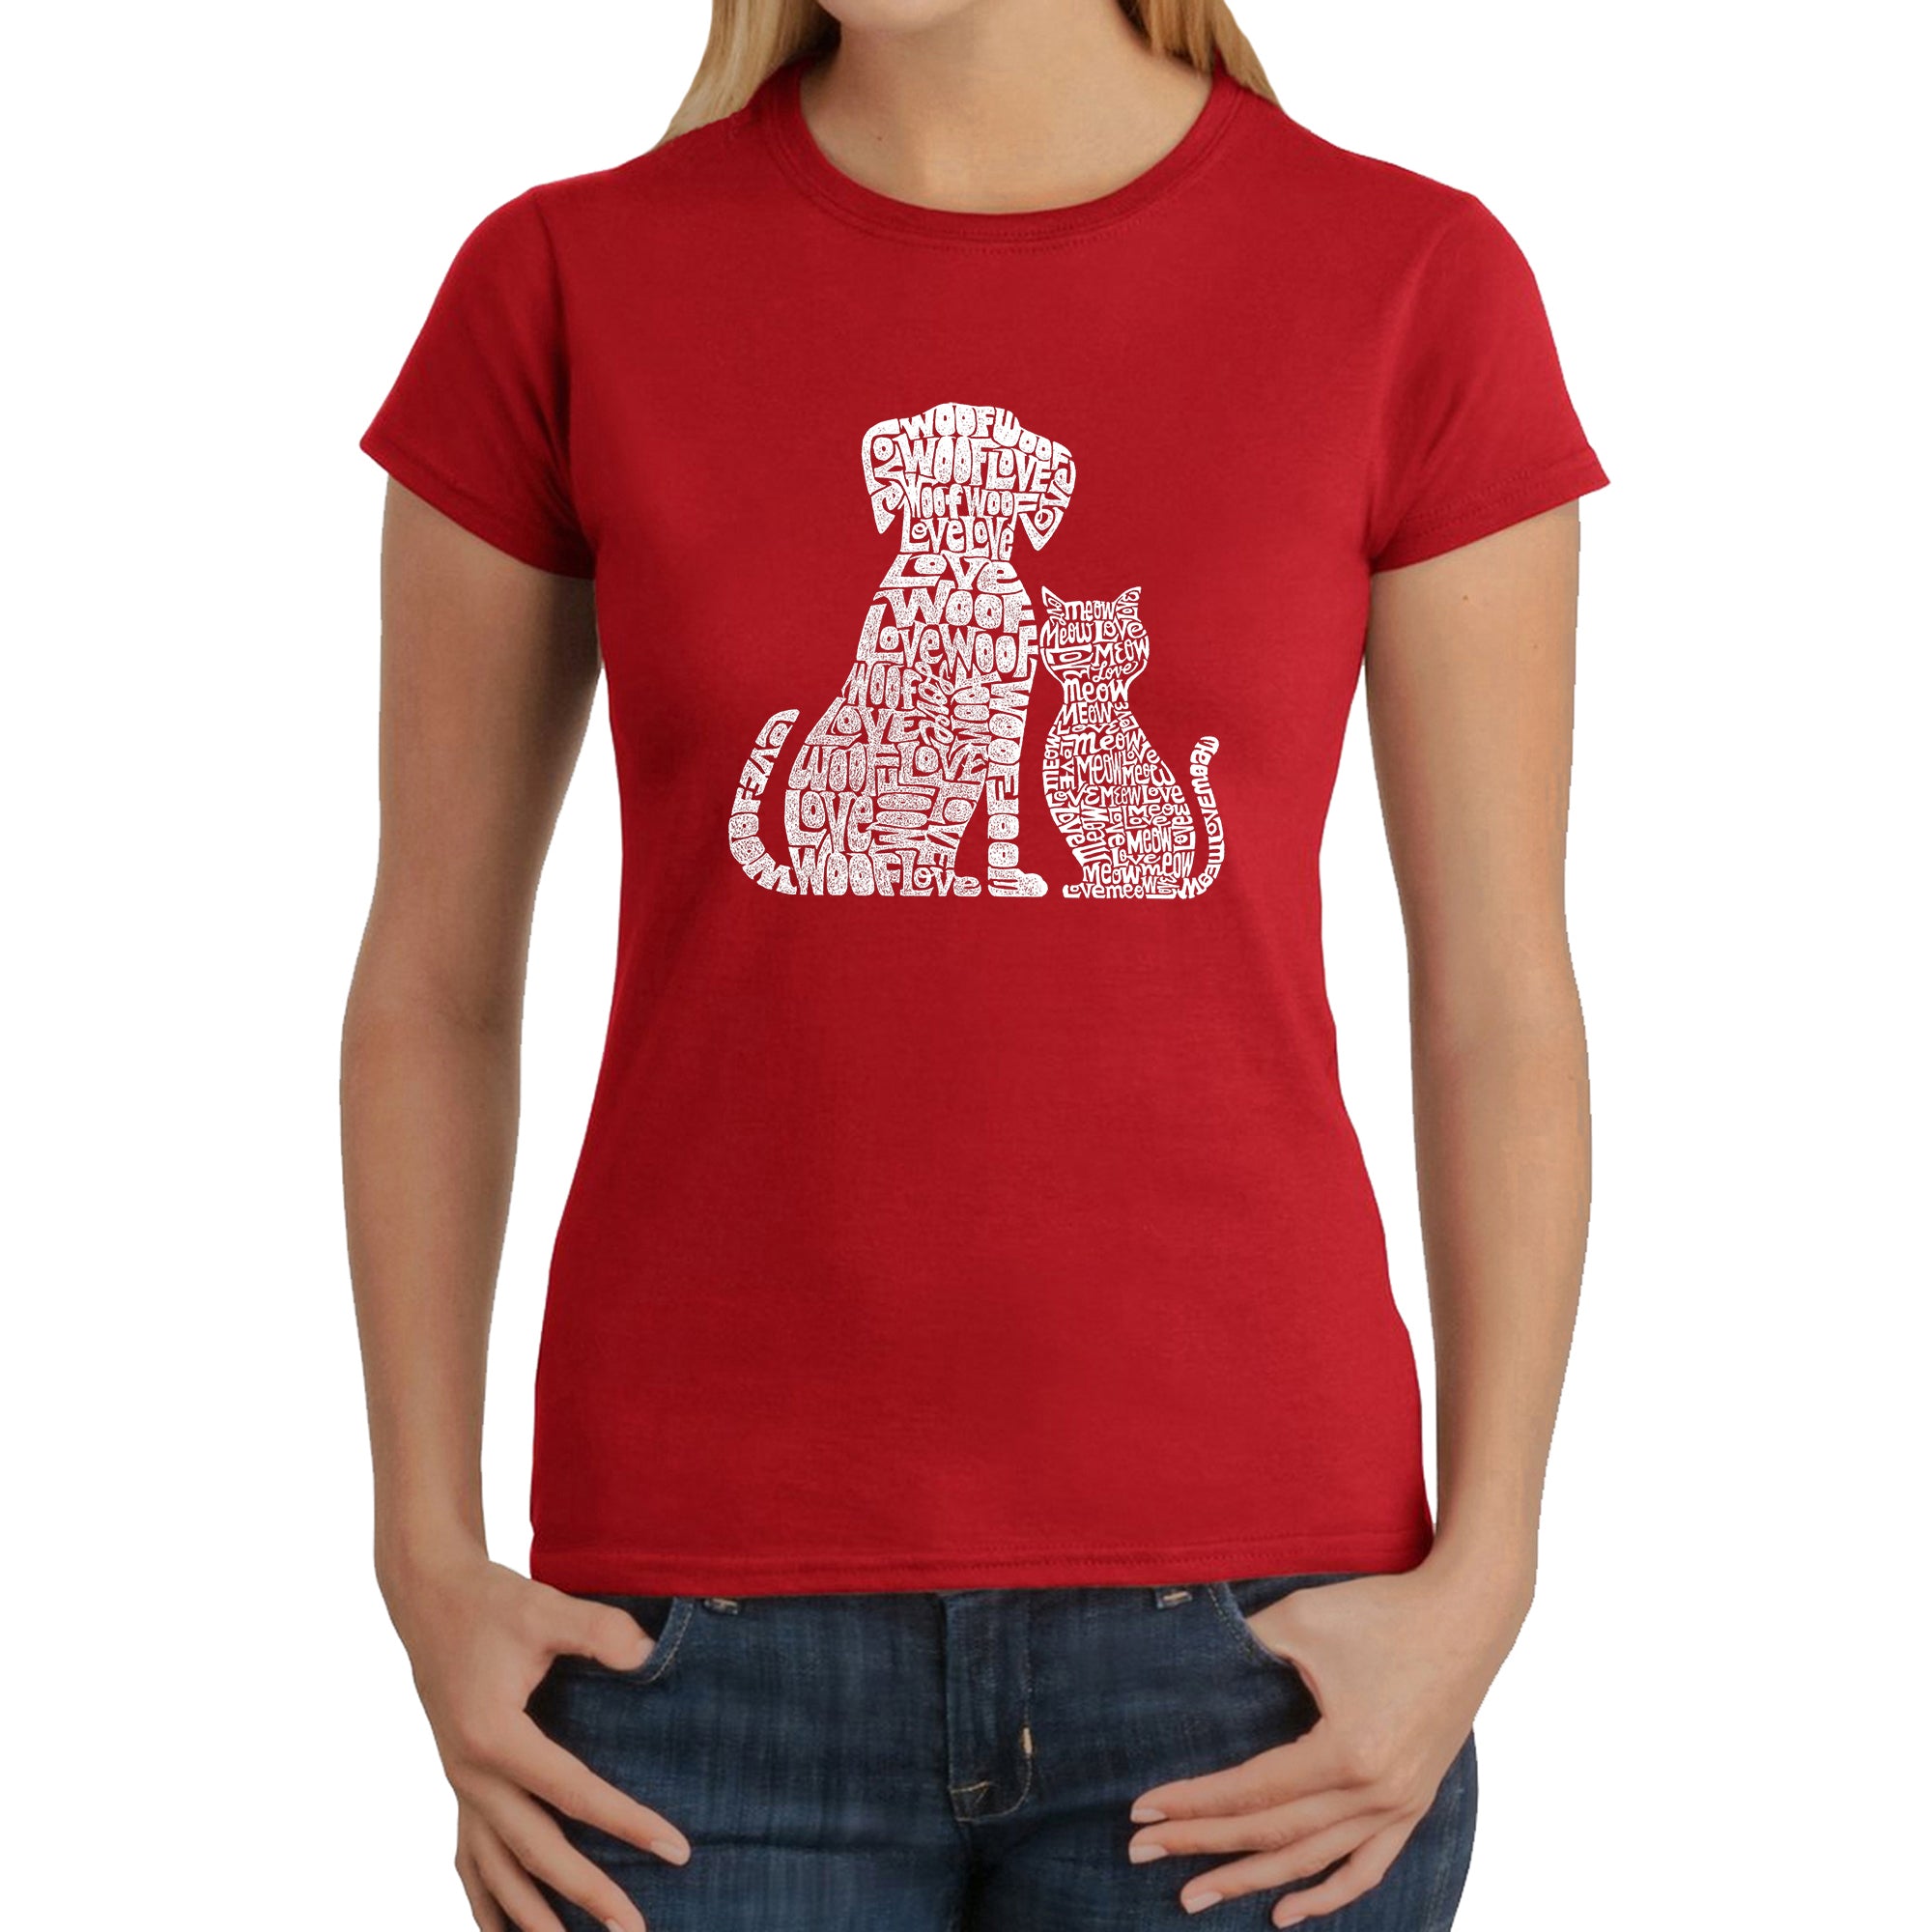 Dogs And Cats - Women's Word Art T-Shirt - Red - Medium